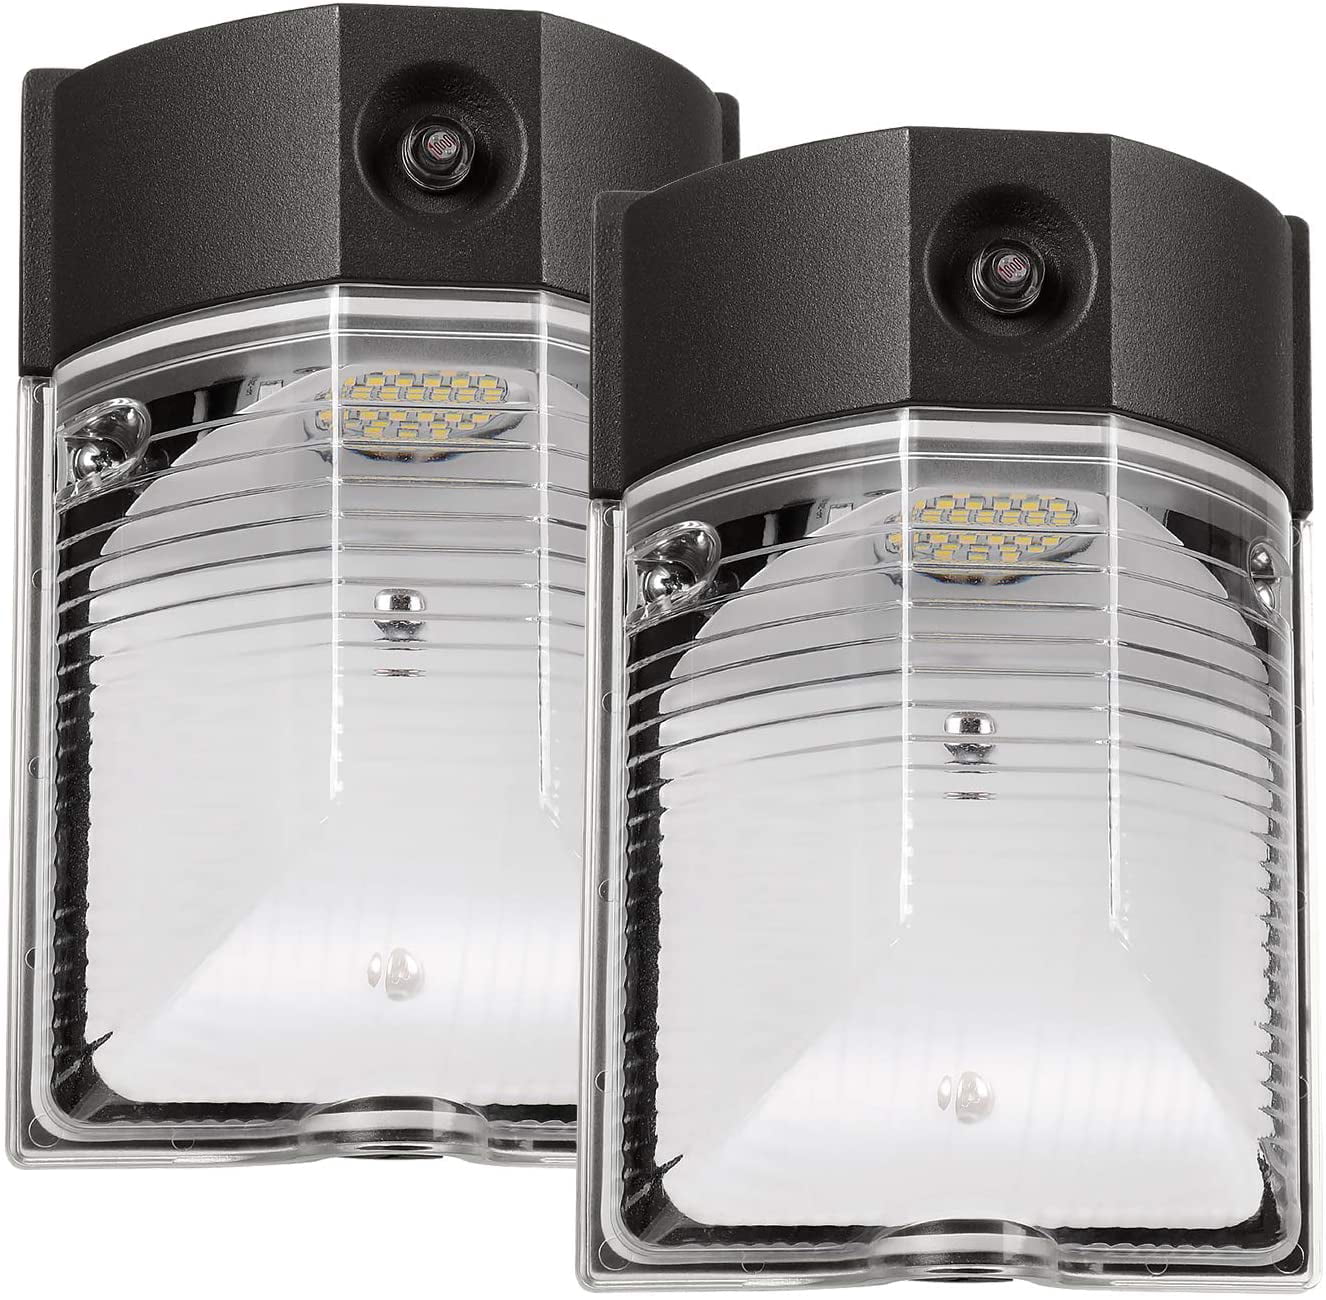 4x 26W LED Wall Light Dusk-to-Dawn Photocell Outdoor 5000K Security Area Lamp 